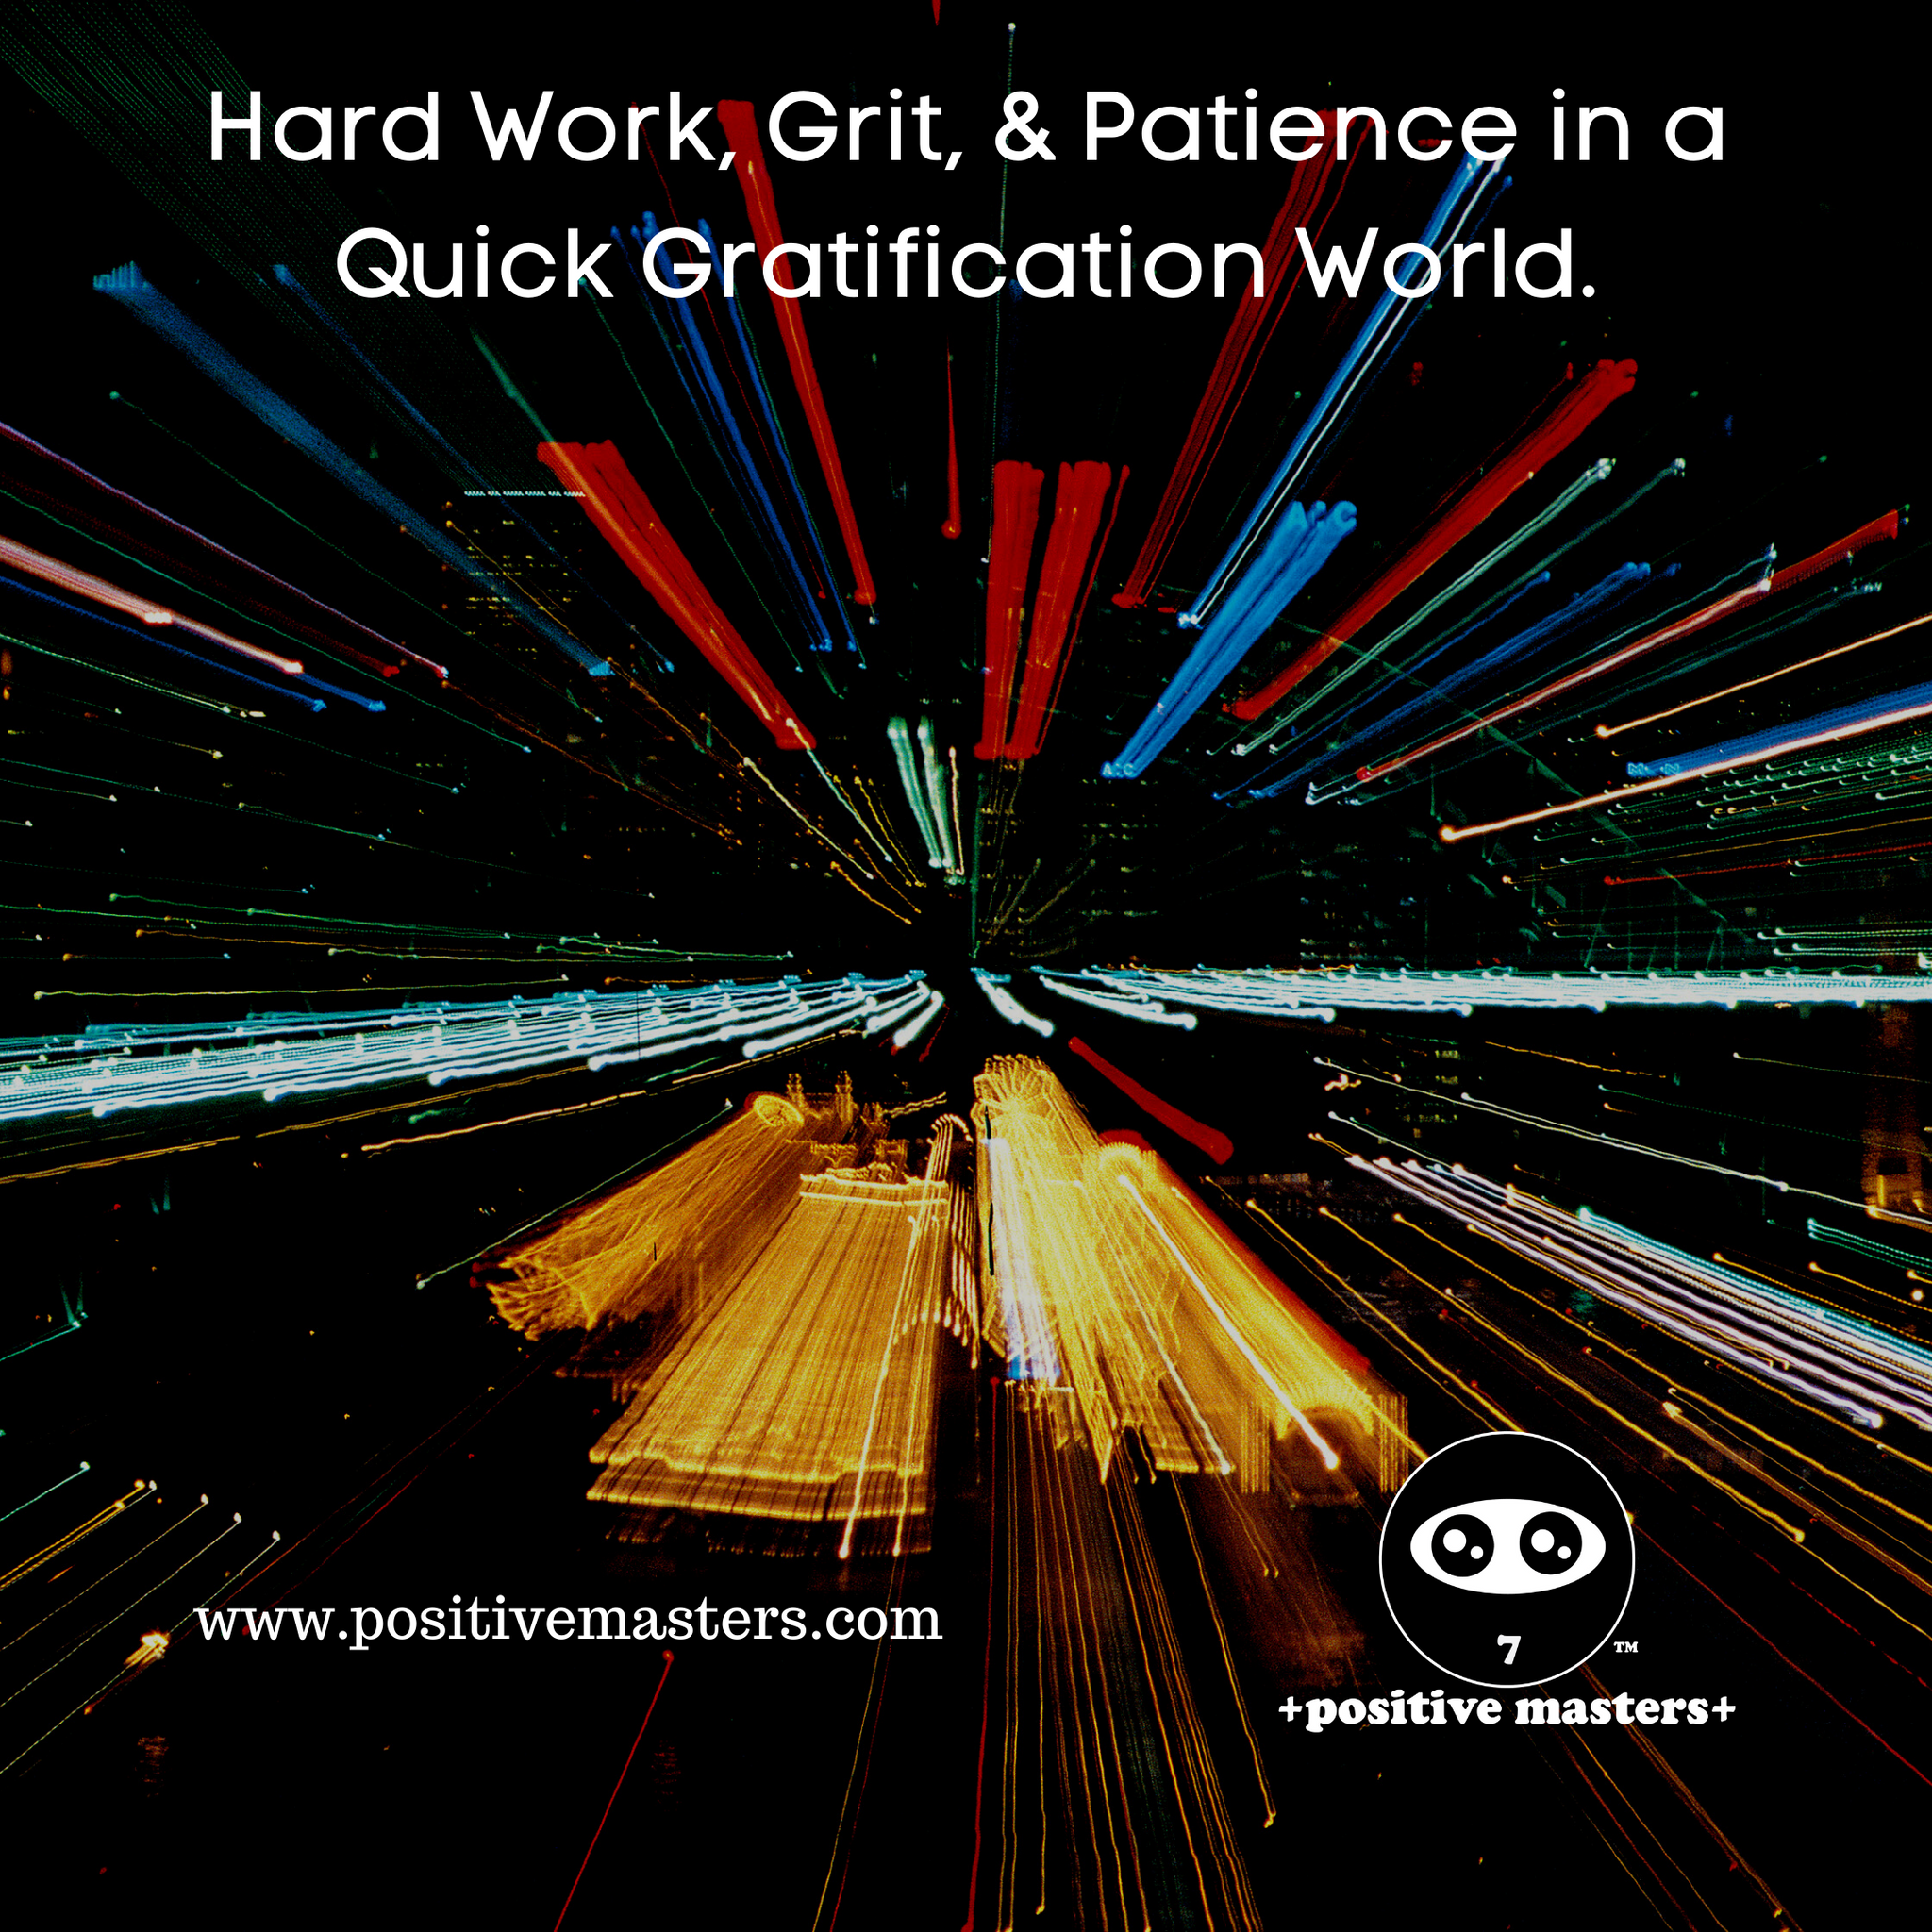 4: Positive Masters Show Podcast - Hard Work, Grit, & Patience in a Quick Gratification World - Audiogram